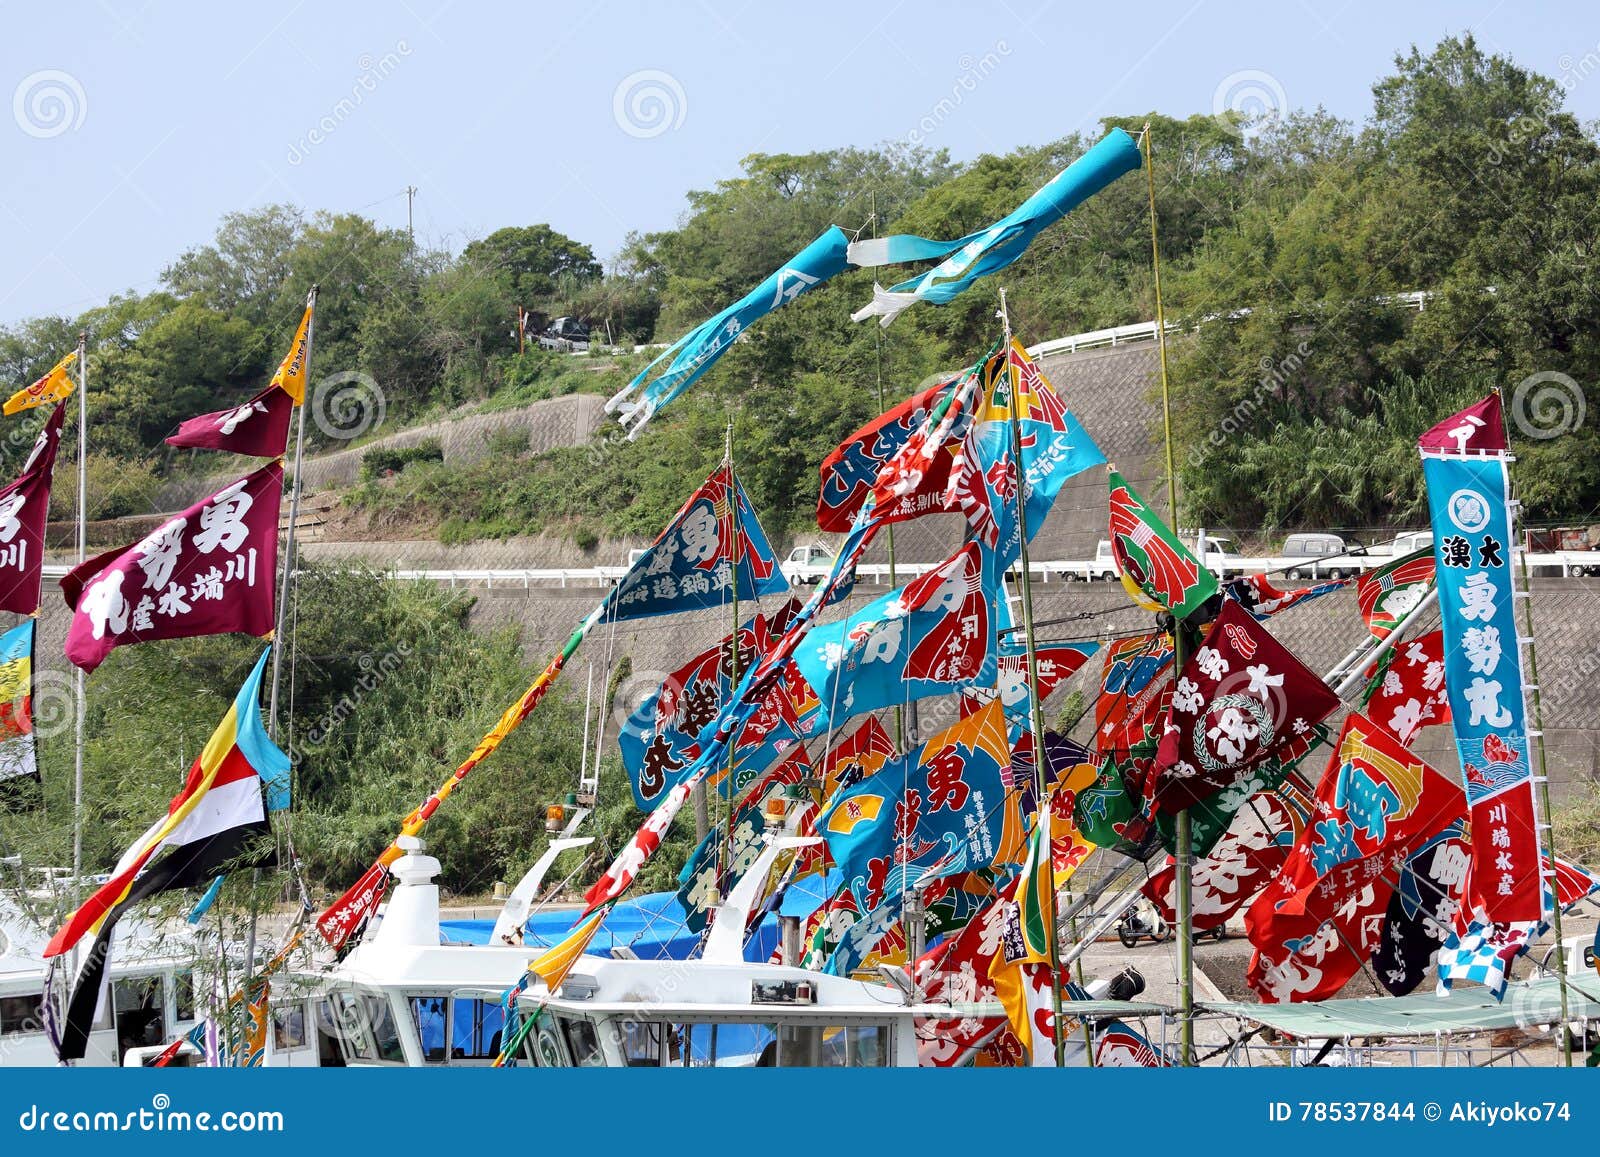 https://thumbs.dreamstime.com/z/japanese-decorated-nautical-flags-beautifully-fishing-boat-78537844.jpg